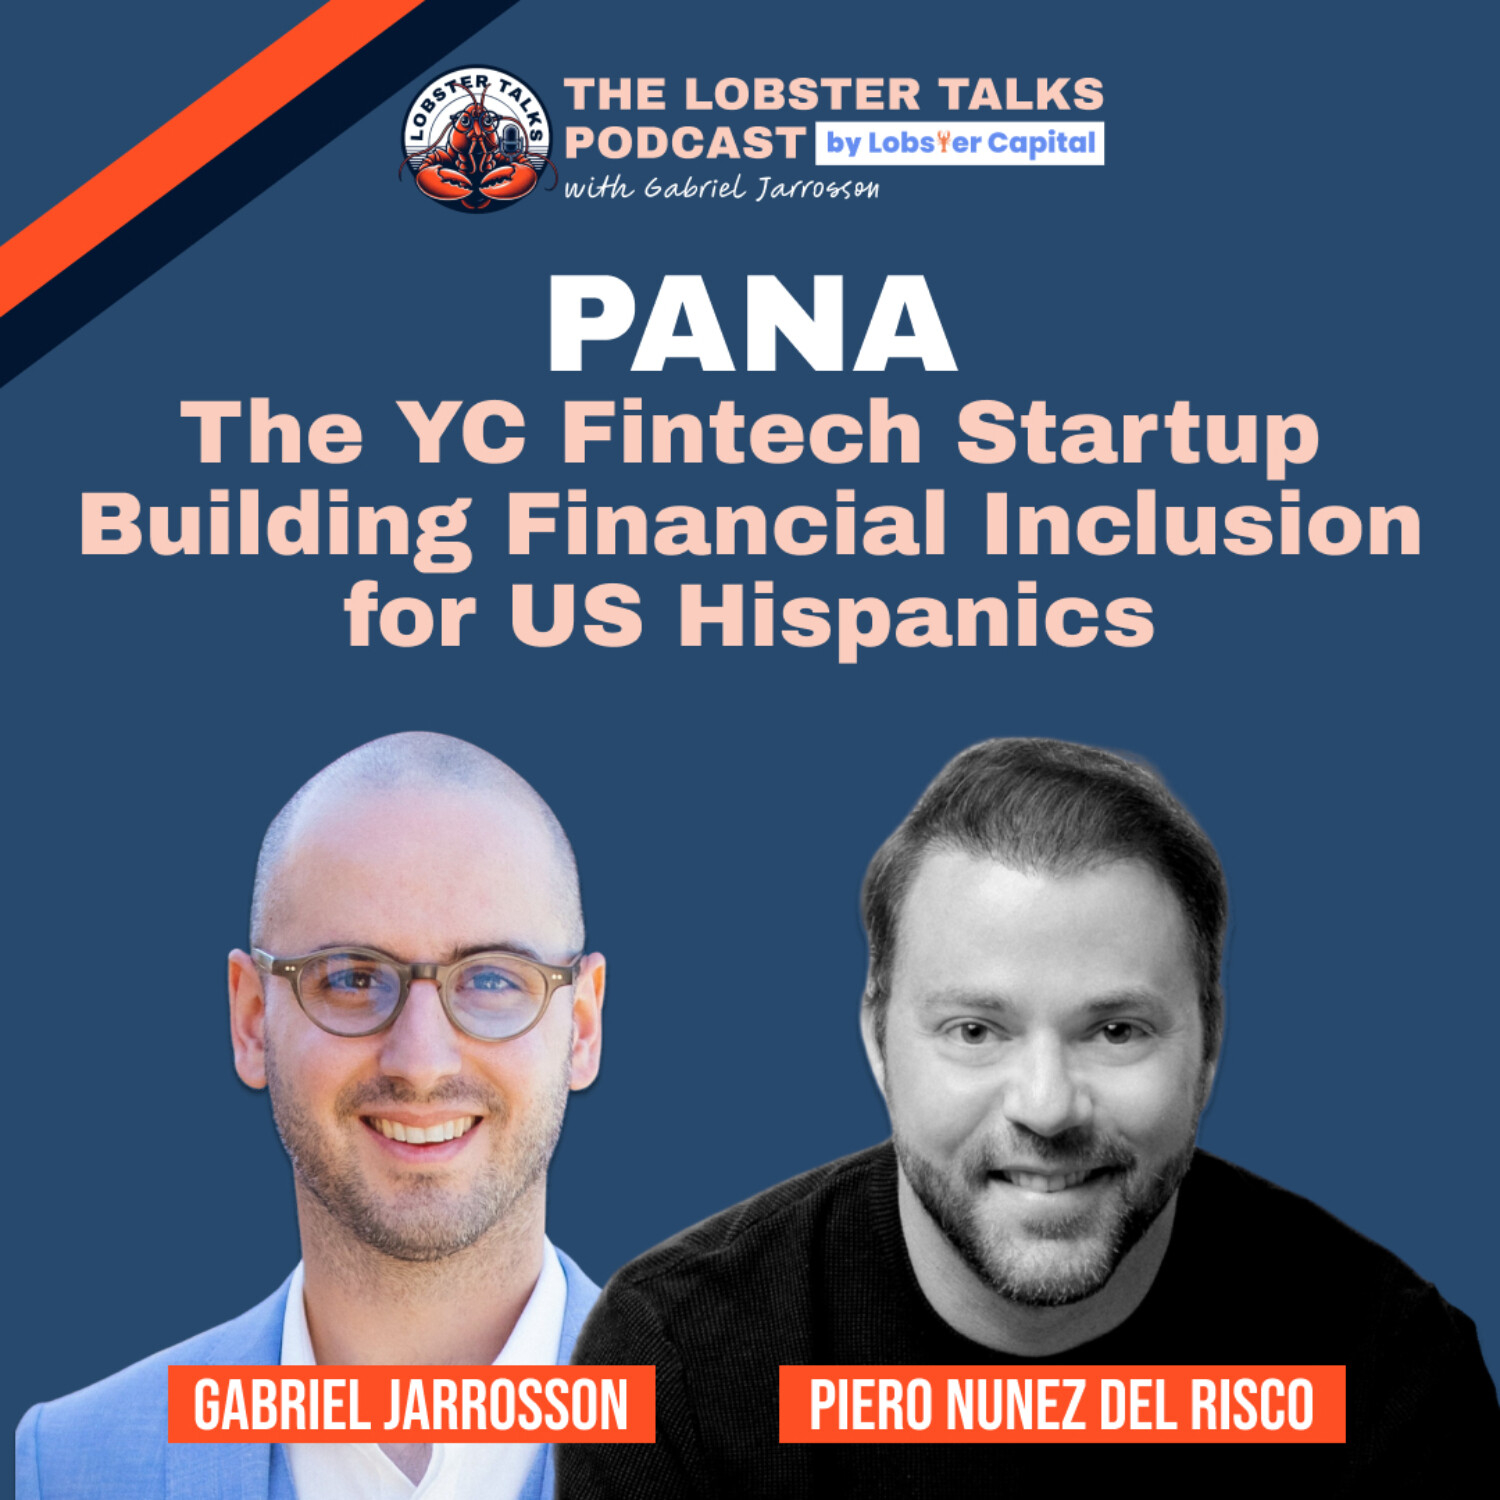 Pana: The YC Fintech Startup Building Financial Inclusion for US Hispanics with Digital Banking